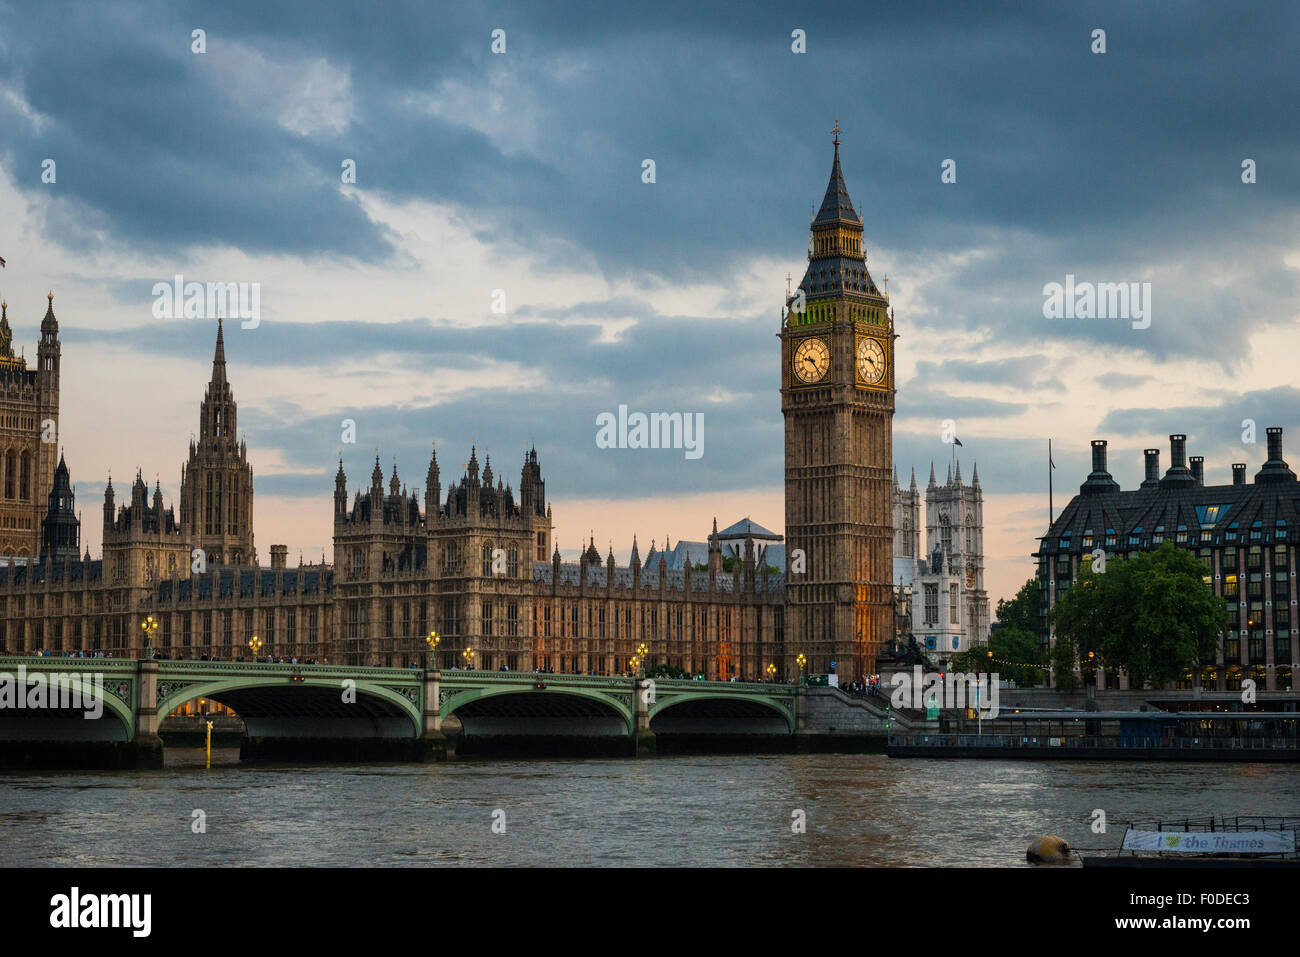 London Southbank Palace Of Westminster Big Ben Elizabeth Tower previously Clock or St Stephens Tower Cathedral Bridge at dusk Stock Photo